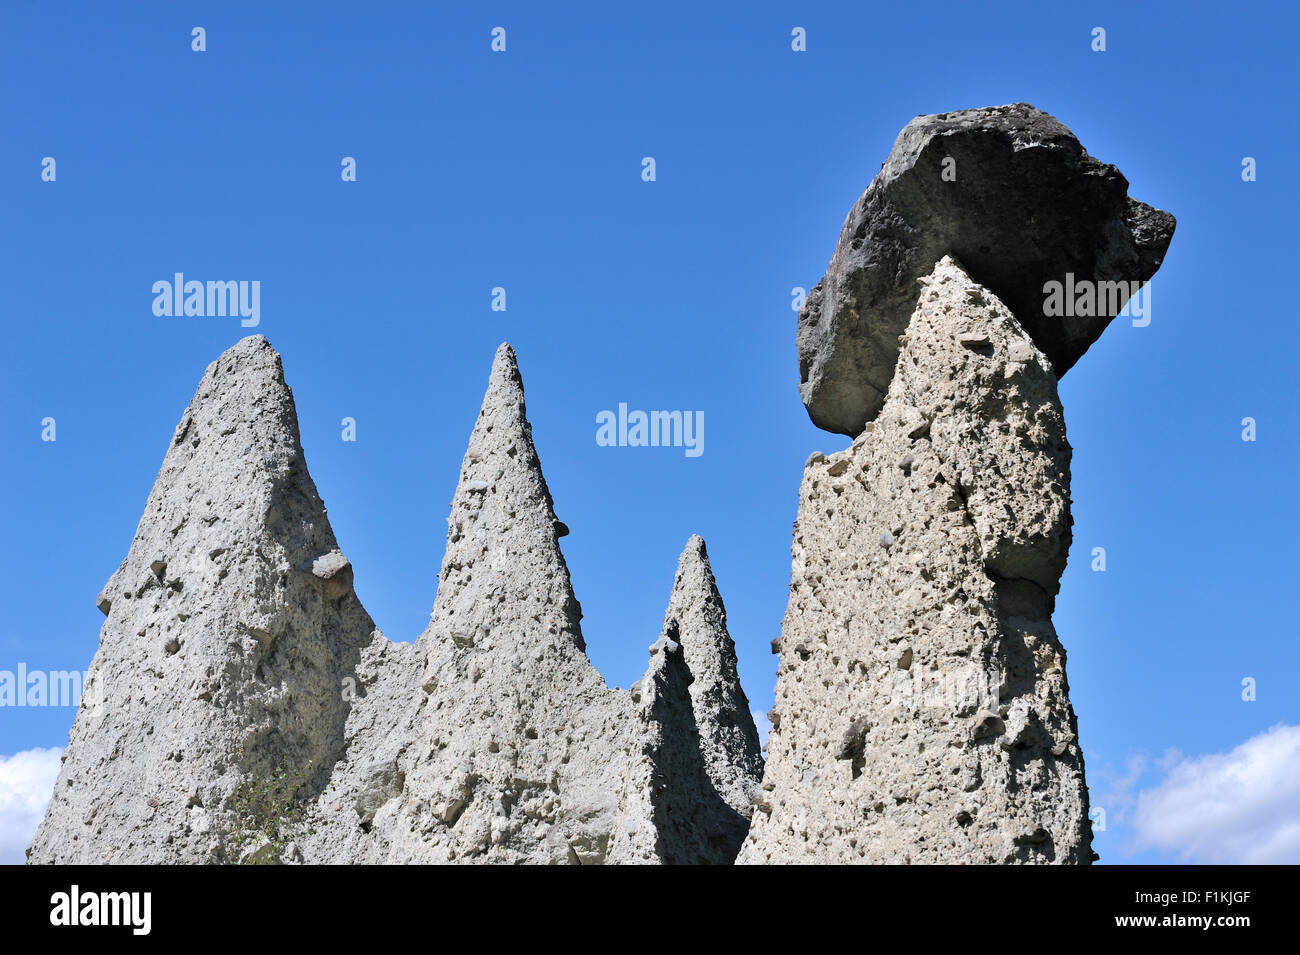 Pyramids of Euseigne, Valais / Wallis, Switzerland. Rocks of harder stone stacked on top protect the columns from rapid erosion Stock Photo